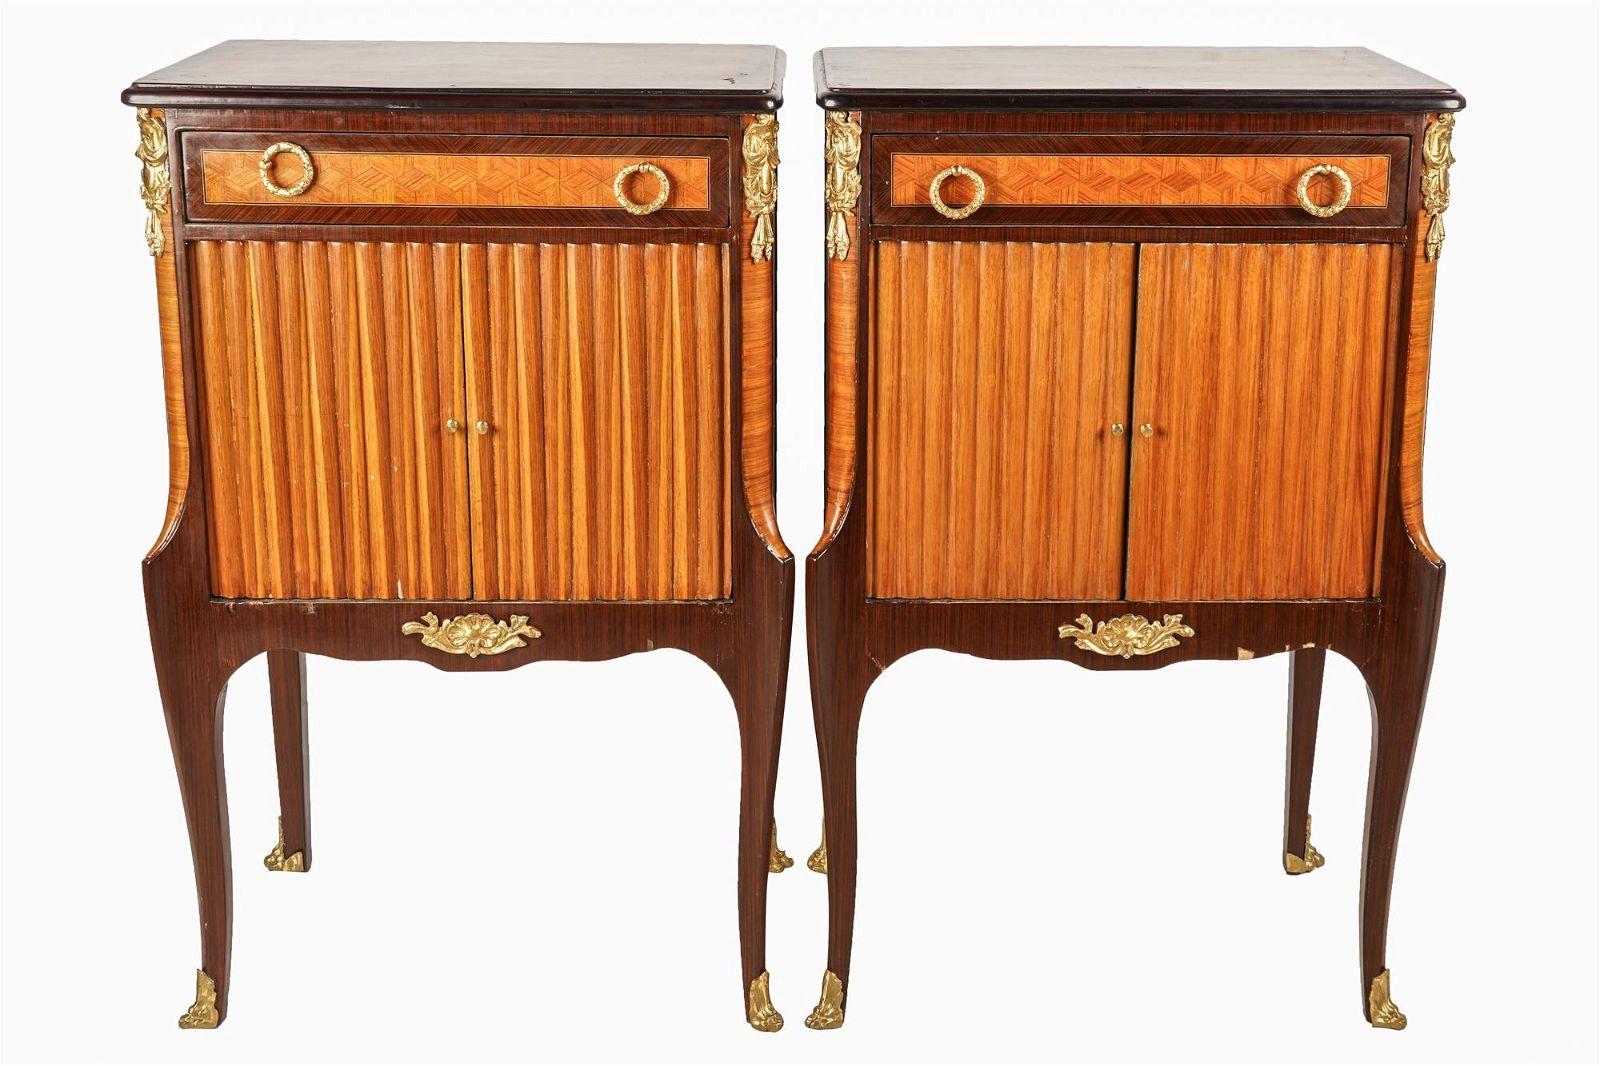 Pair of French Louis XV / XVI Transitional Style Marquetry Commodes With Exotic Satinwood, Rosewood and Walnut Woods. Rectangular satinwood marquetry top over single drawer with two gilt bronze pulls surmounting a single compartment enclosed by pair